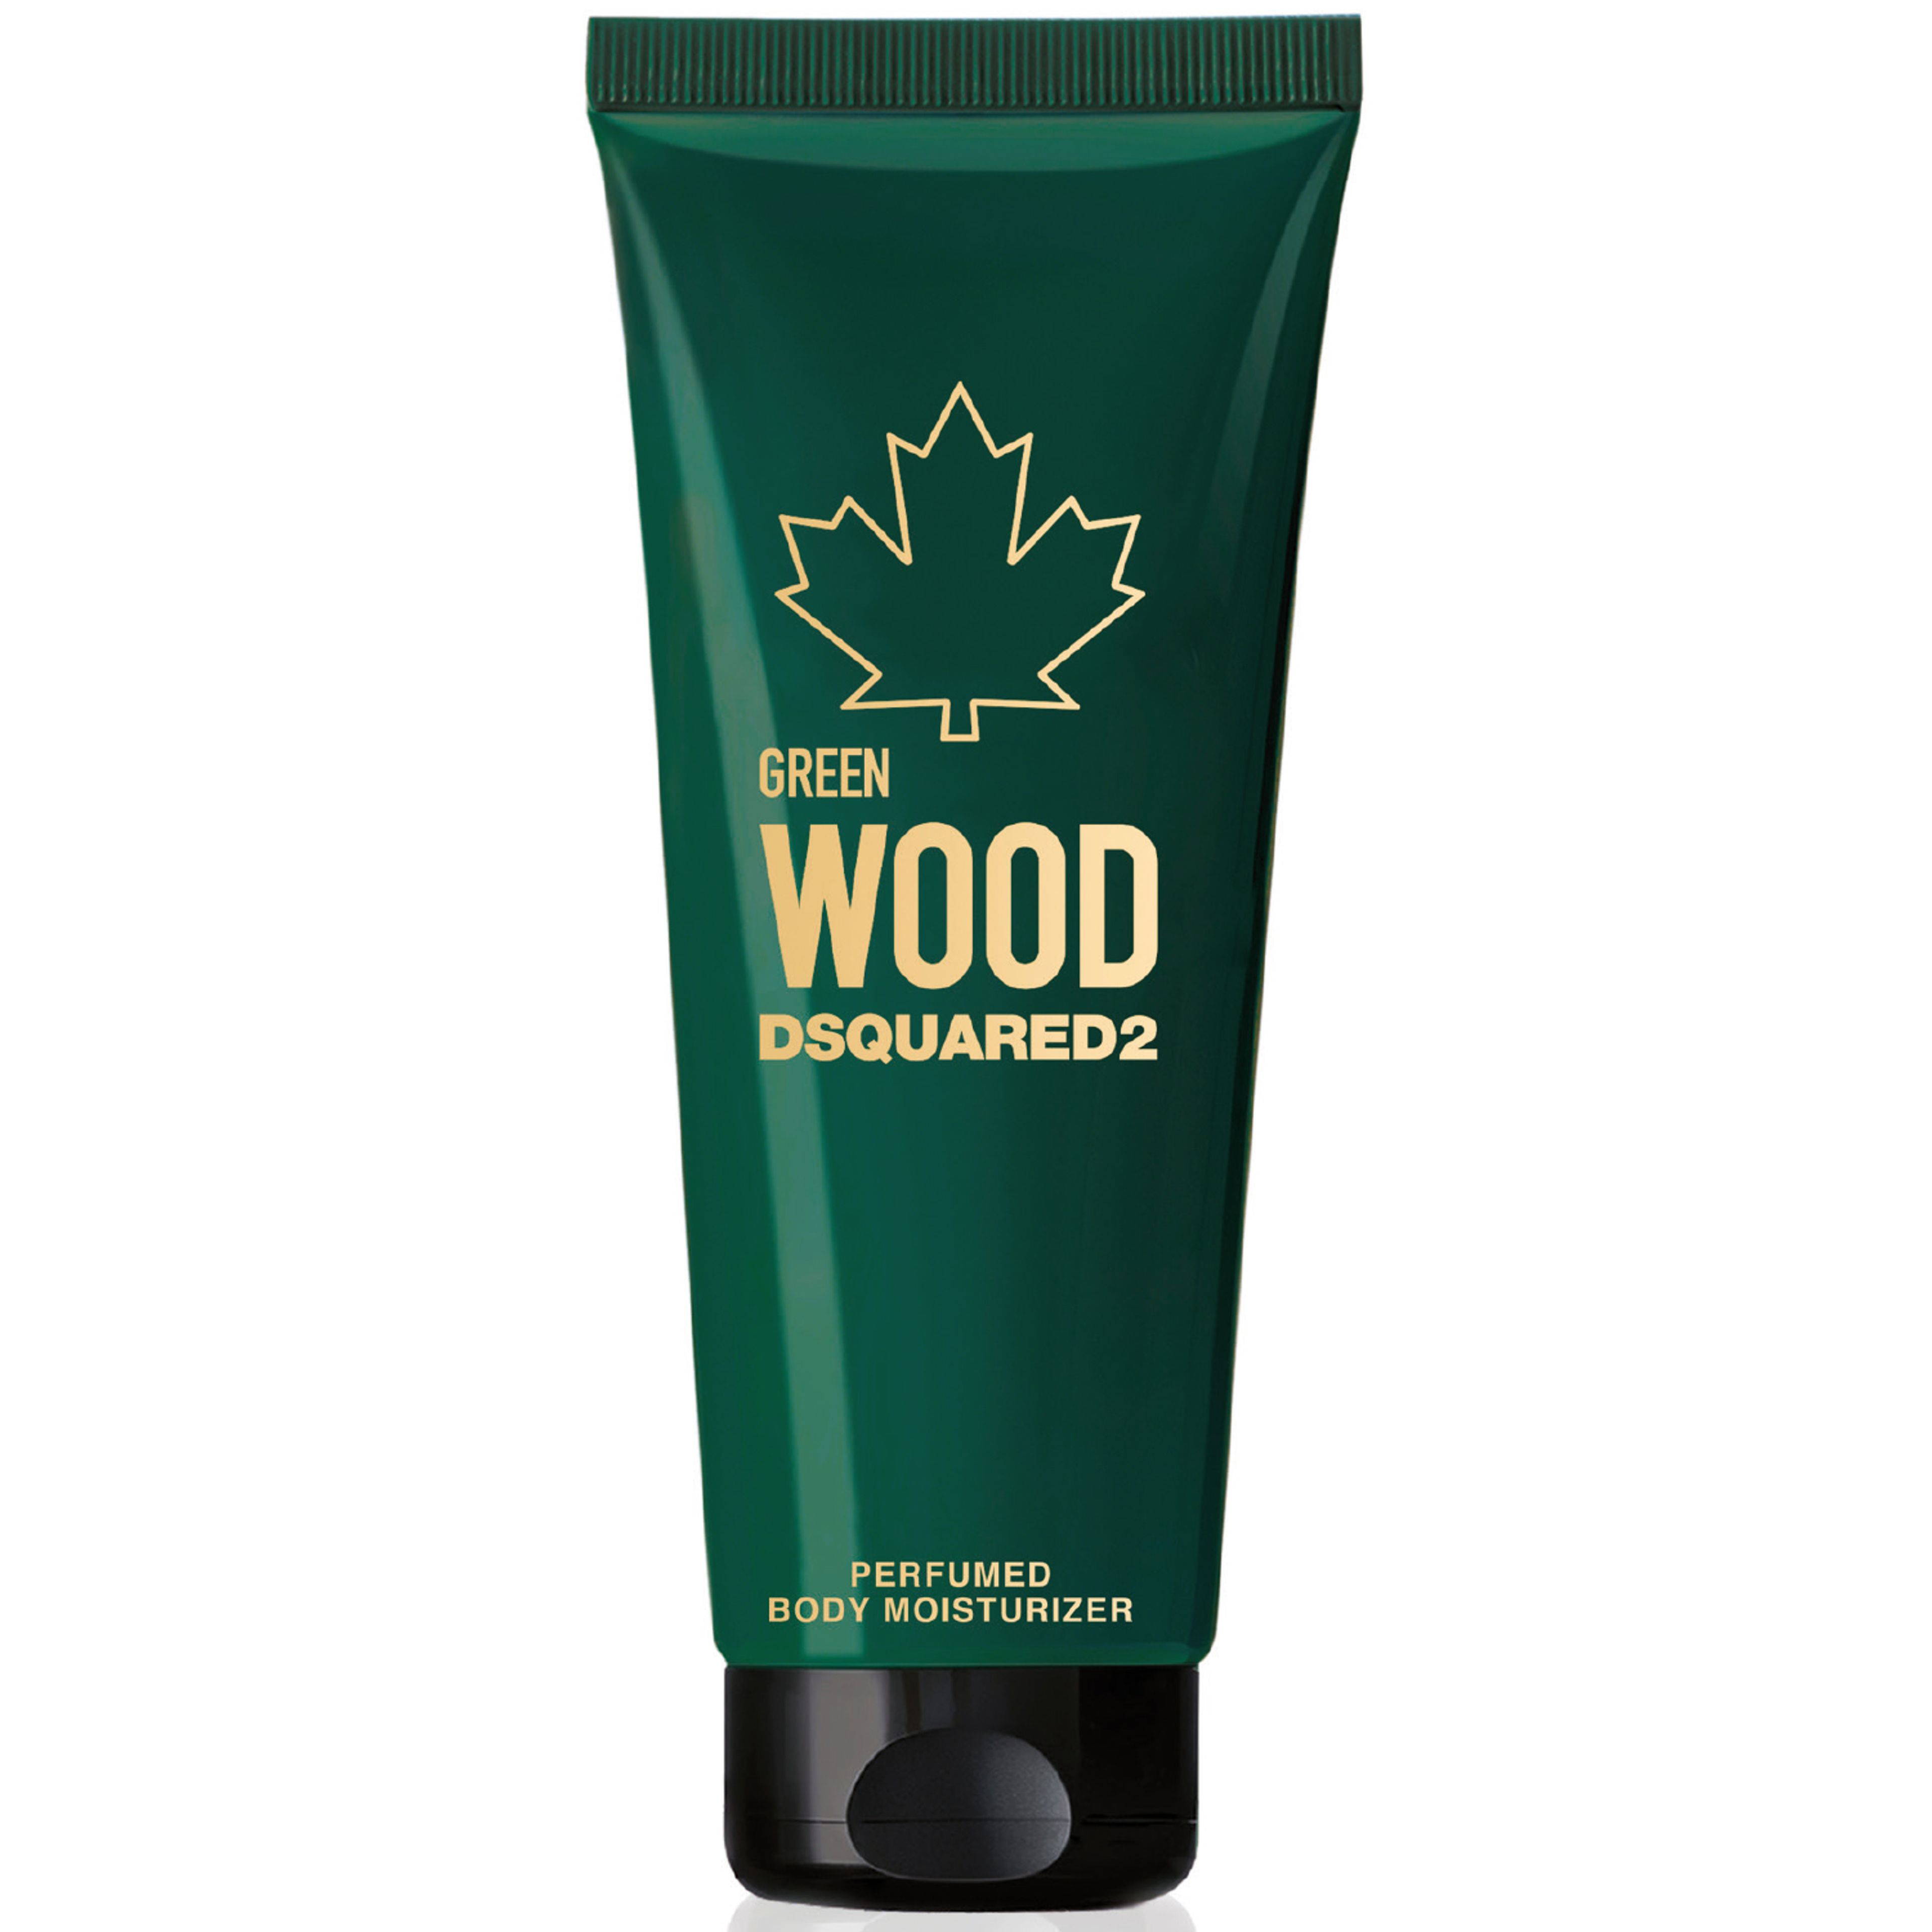 Dsquared2 Green Wood Pour Homme Perfumed Body Moisturizer 1